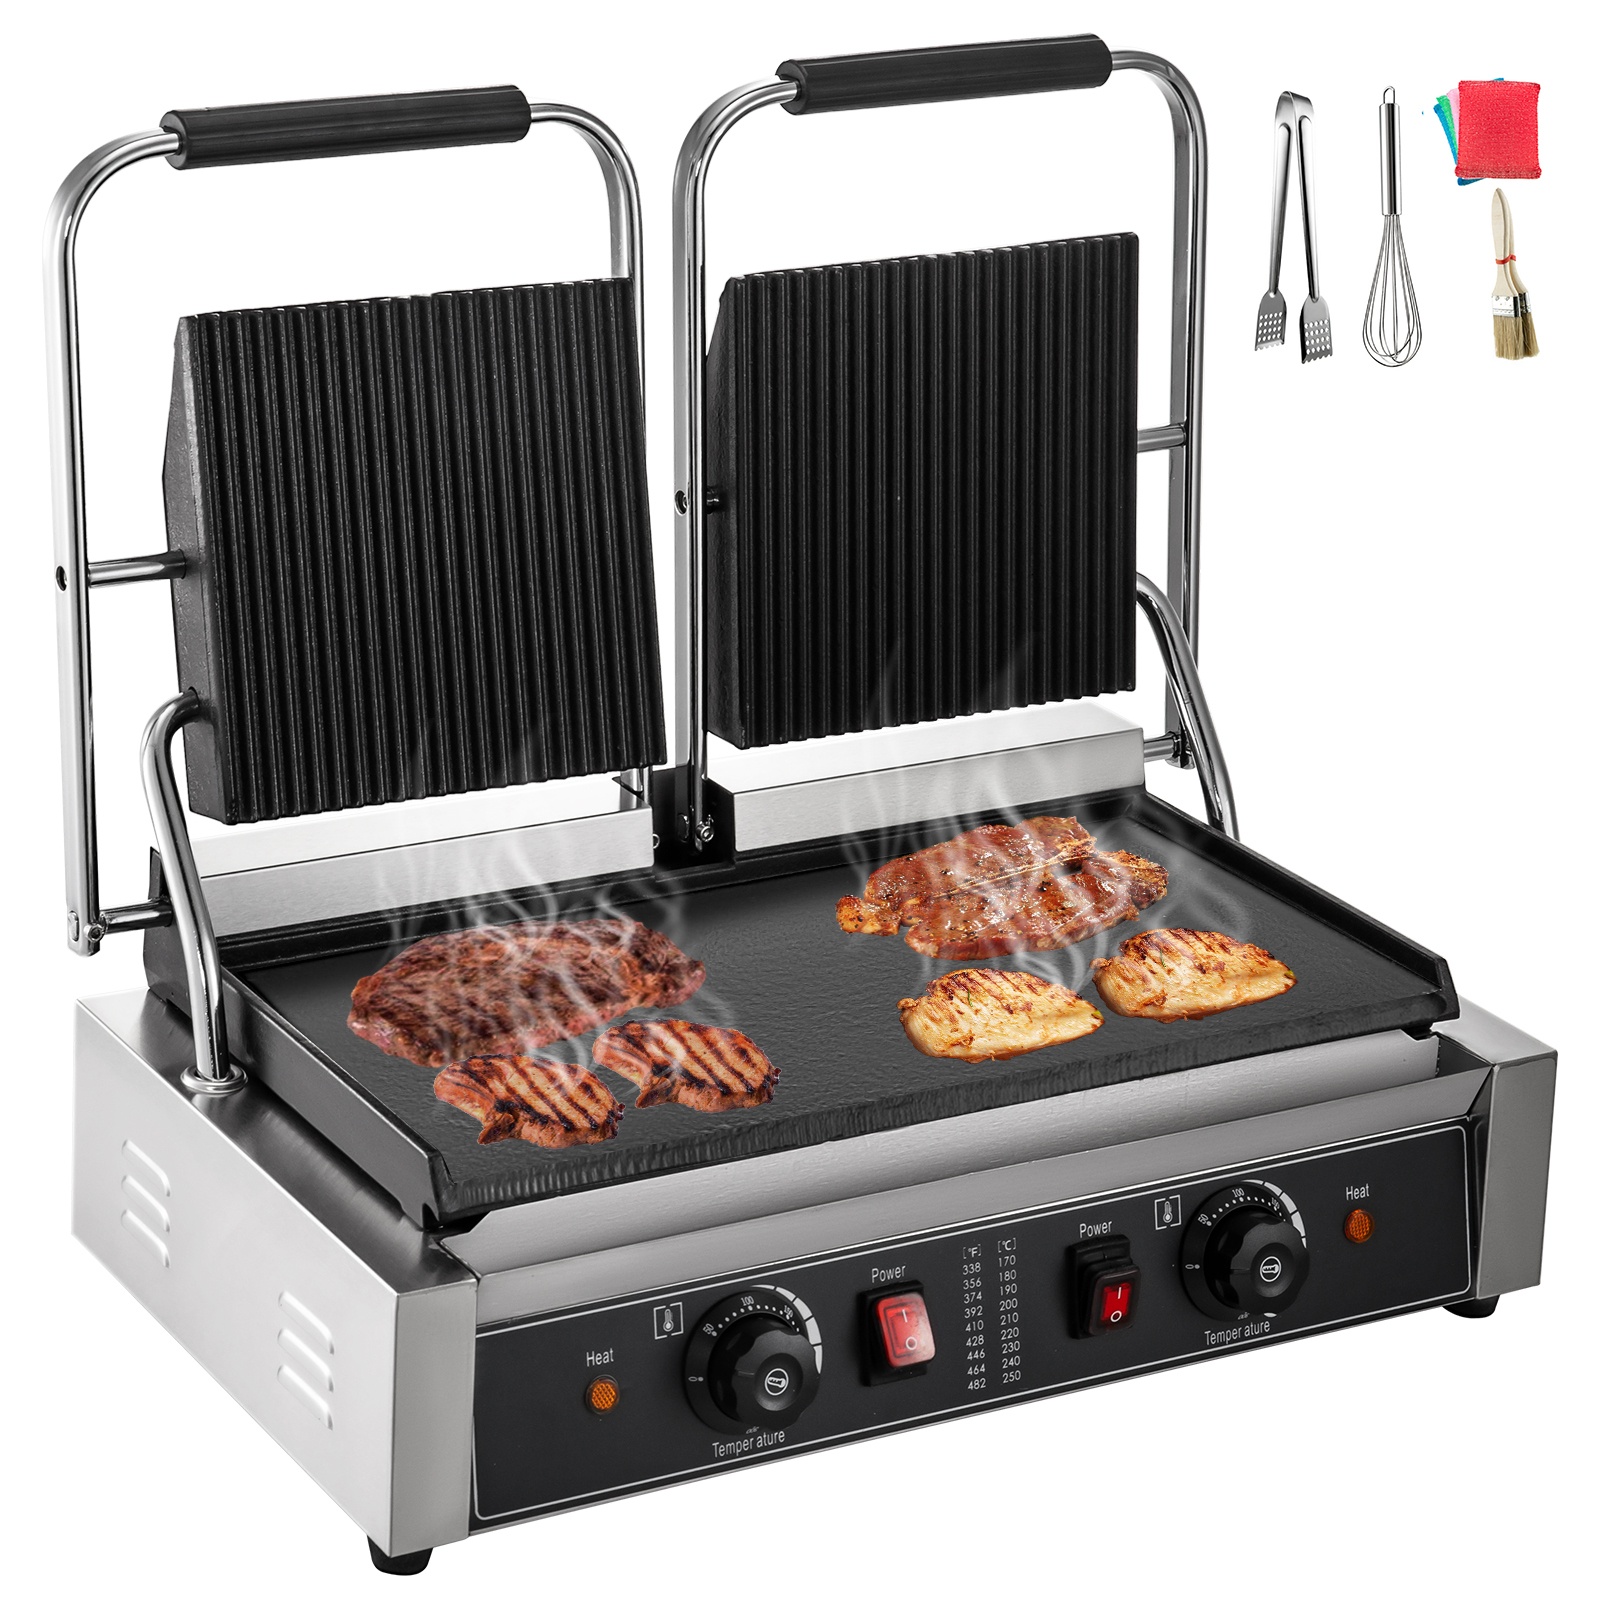 commercial panini press grill, double half grooved plates, 1.8kw